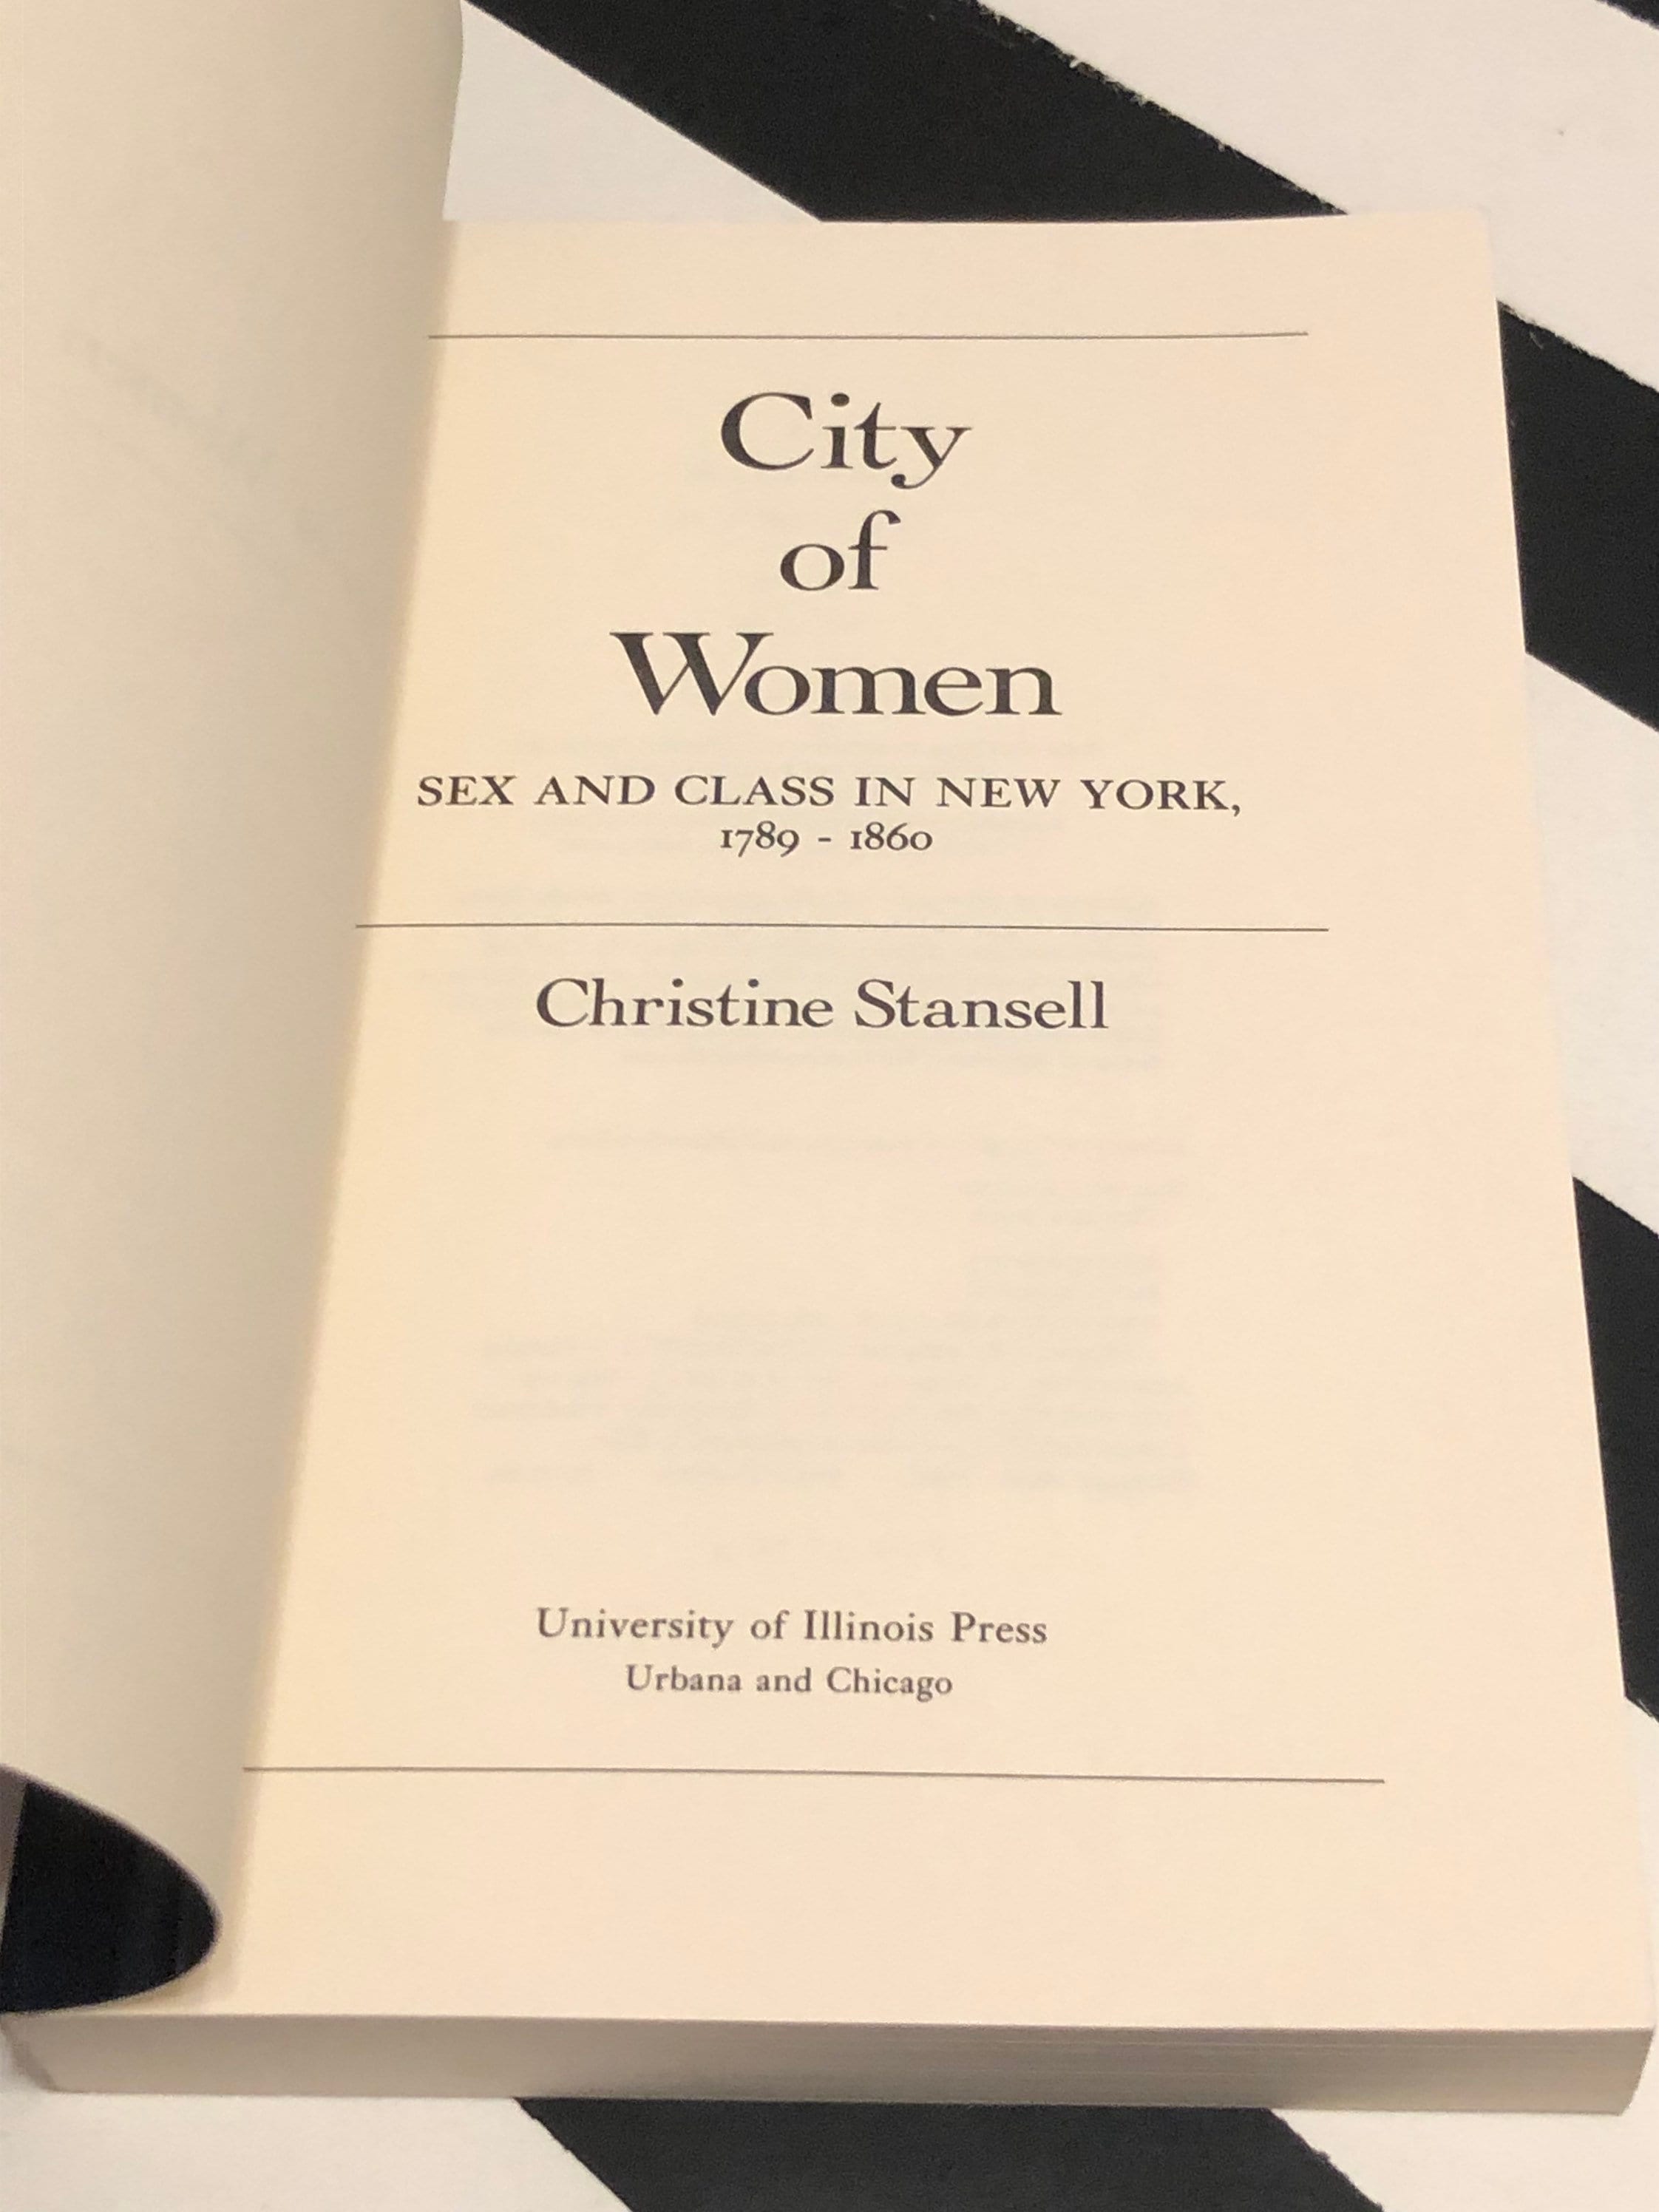 City of Women Sex and Class in New York by Christine Stansell